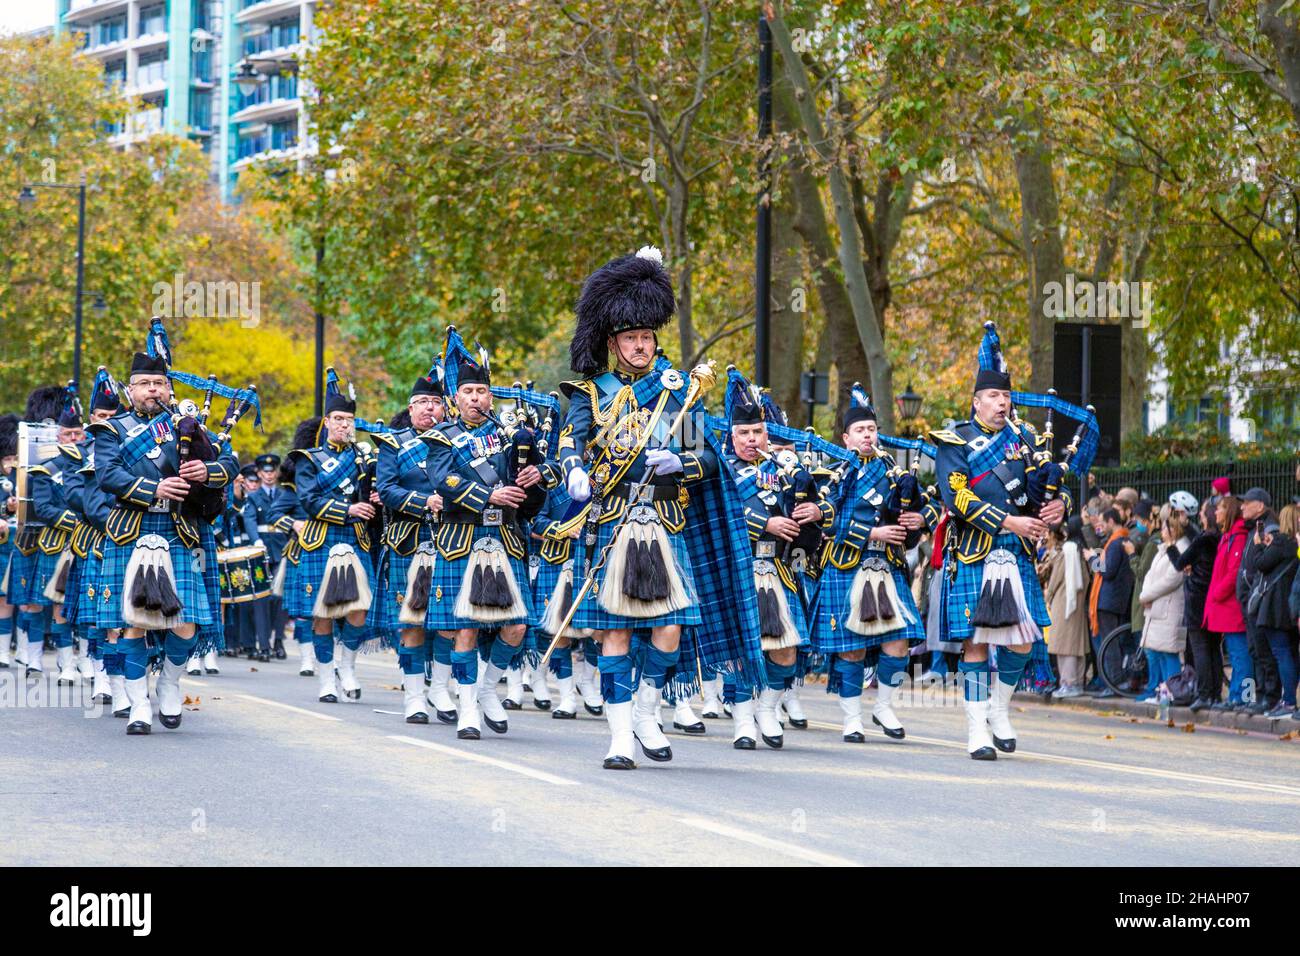 13. November 2021, London, UK - Lord Mayor's Show, RAF Waddington Pipes & Drums in Kilts, Matching and Playing Pipes Stockfoto